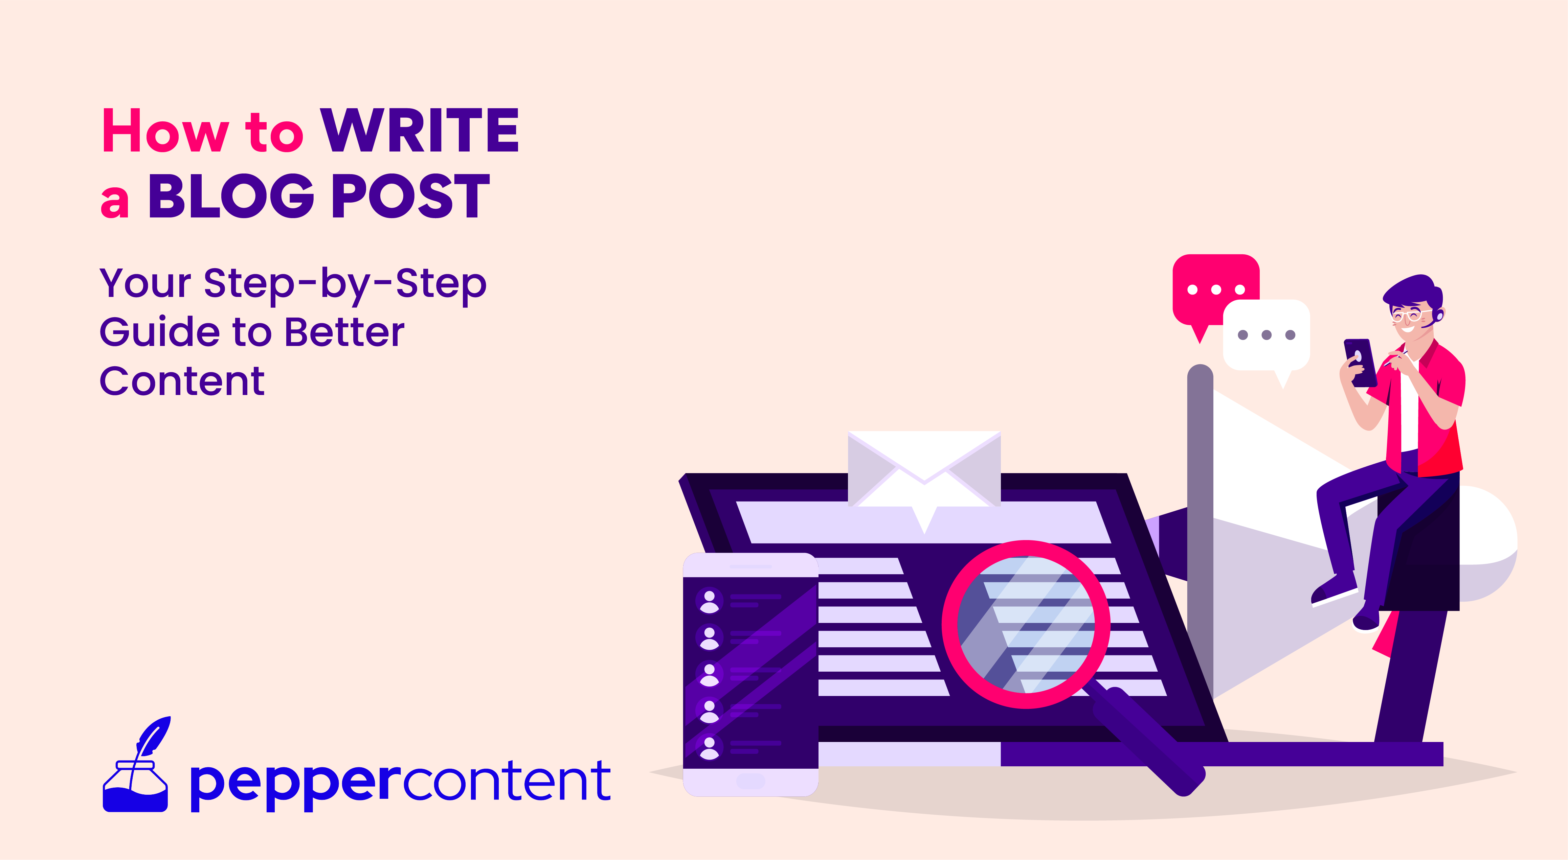 A Step-by-Step Guide to Writing a Blog Post [+Free Blog Templates]